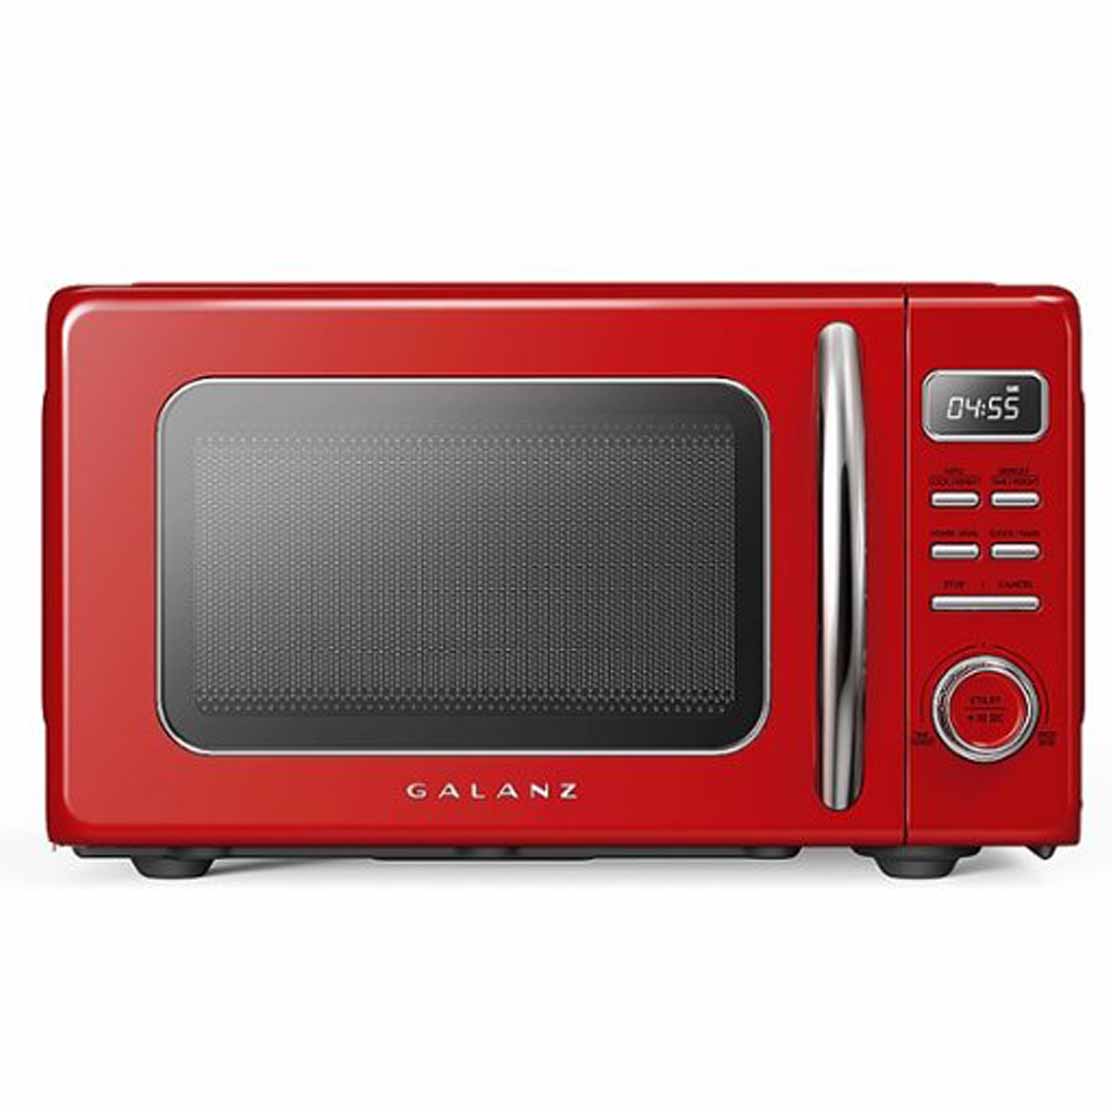 red retro microwave with silver handle and buttons